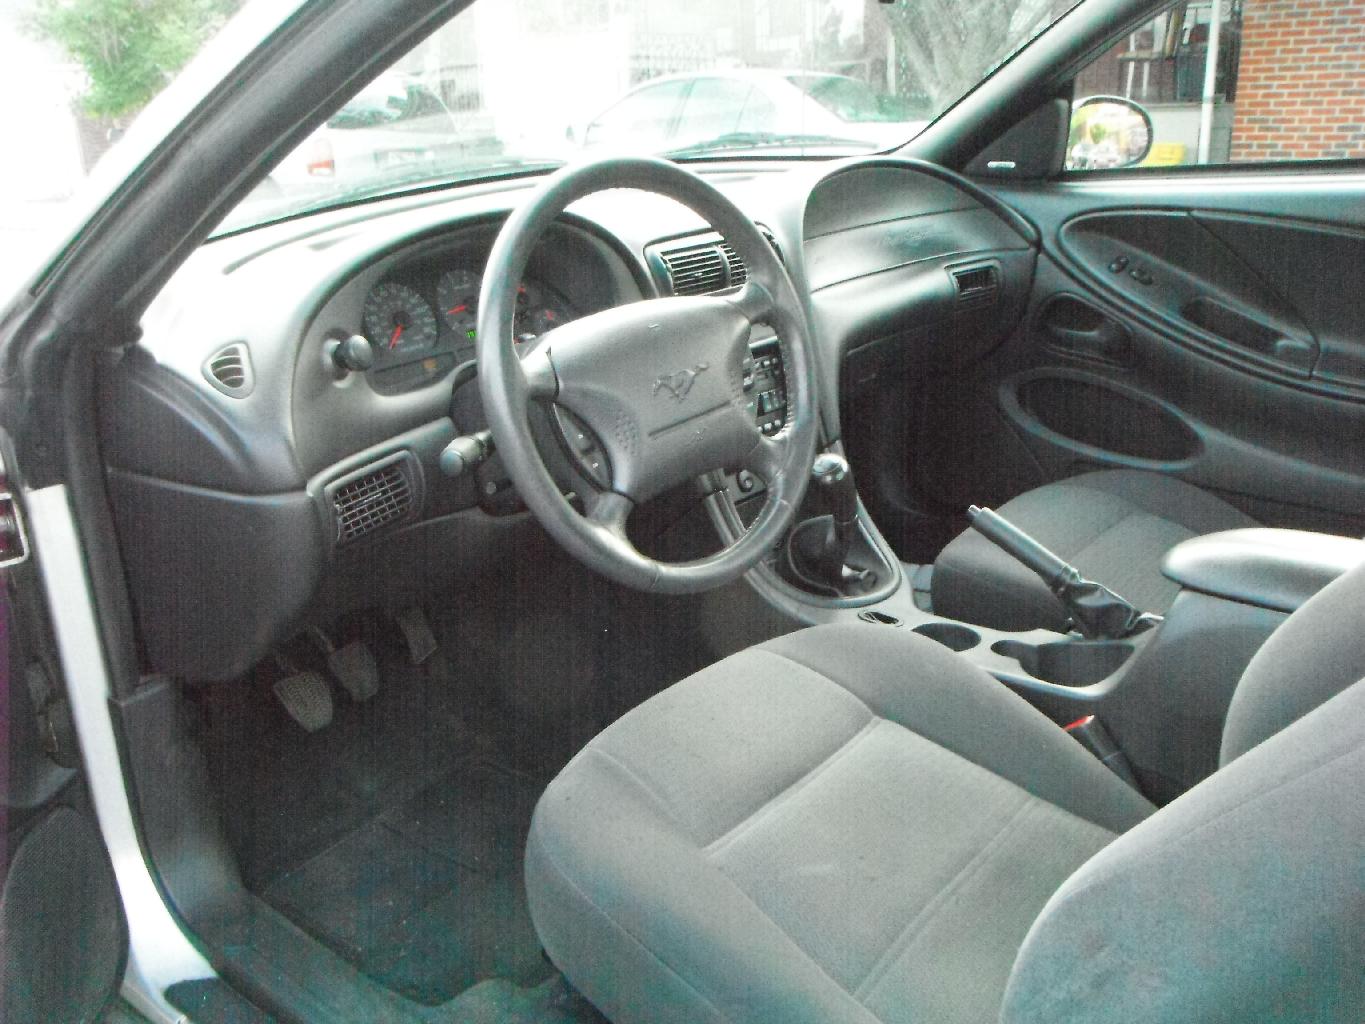 2001 Accessory ford interior mustang #2